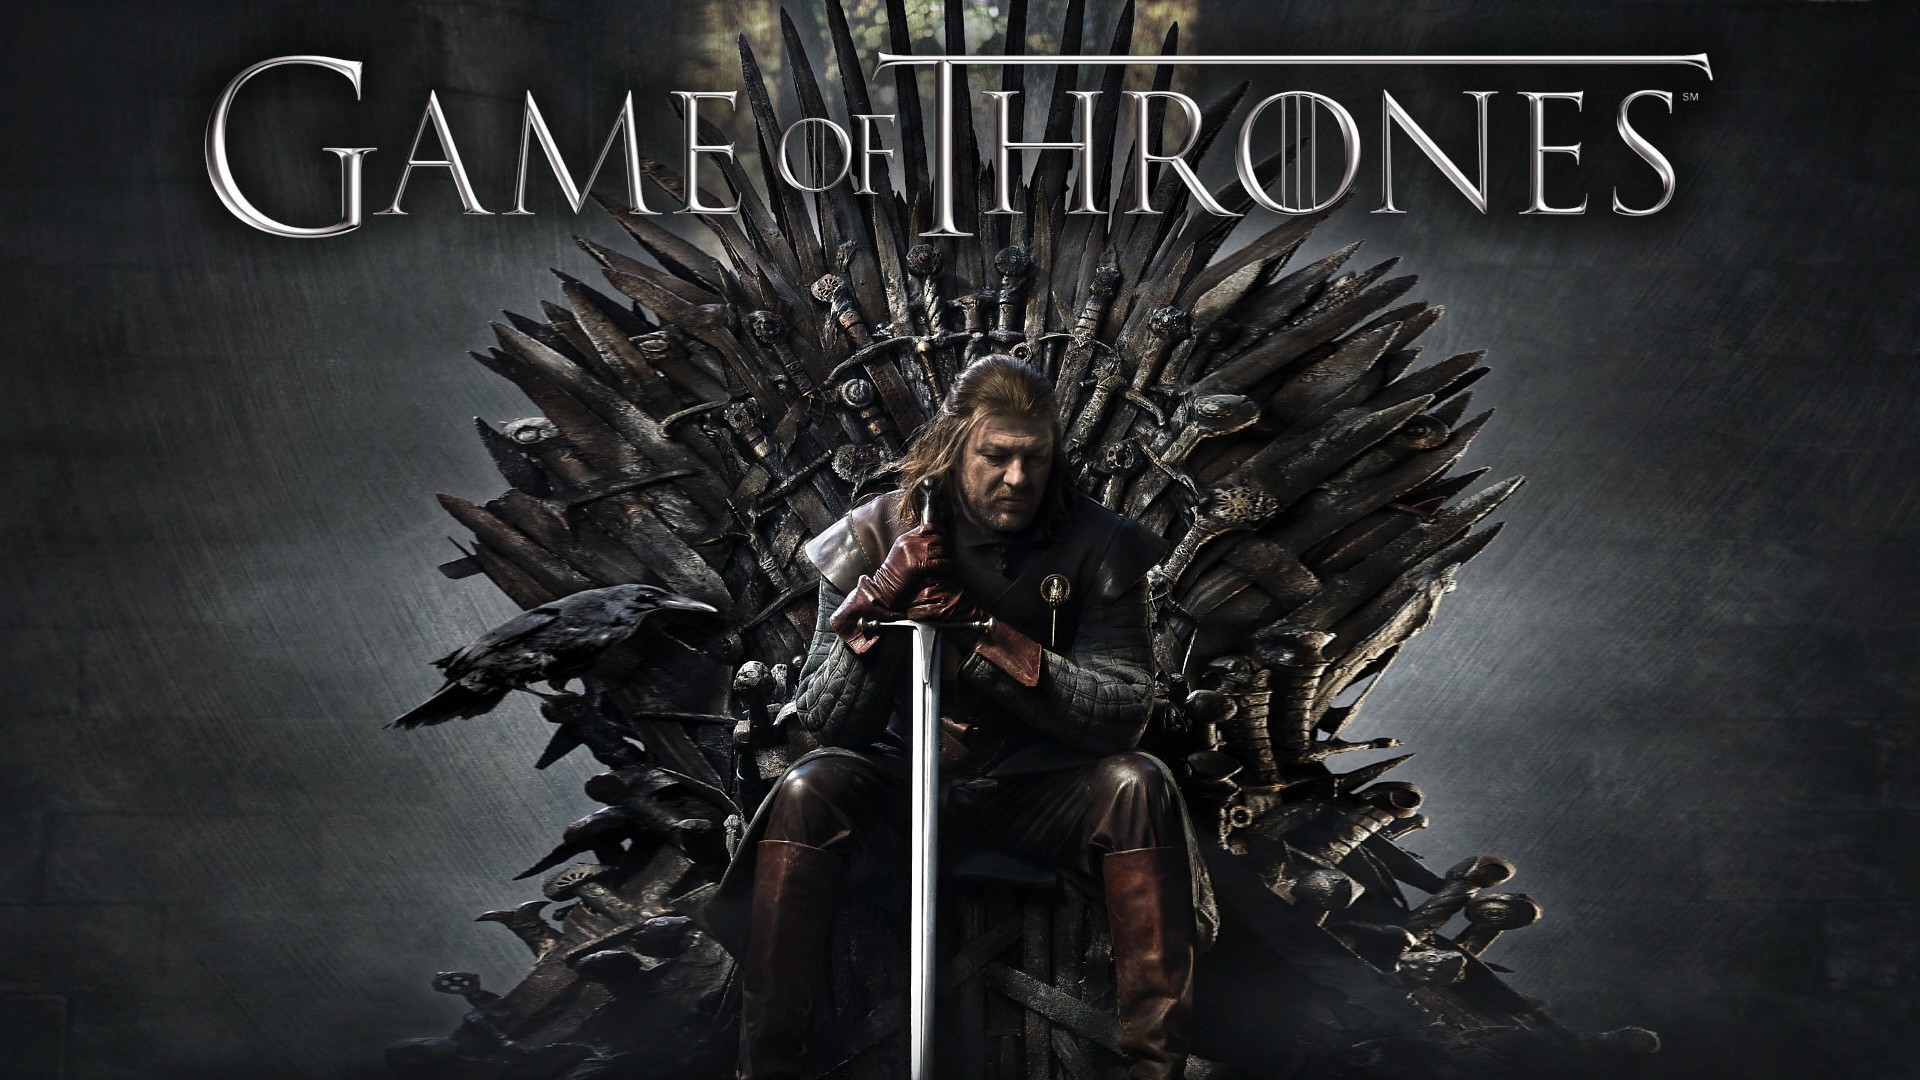 Download game of thrones season 1 hd background HD wallpaper